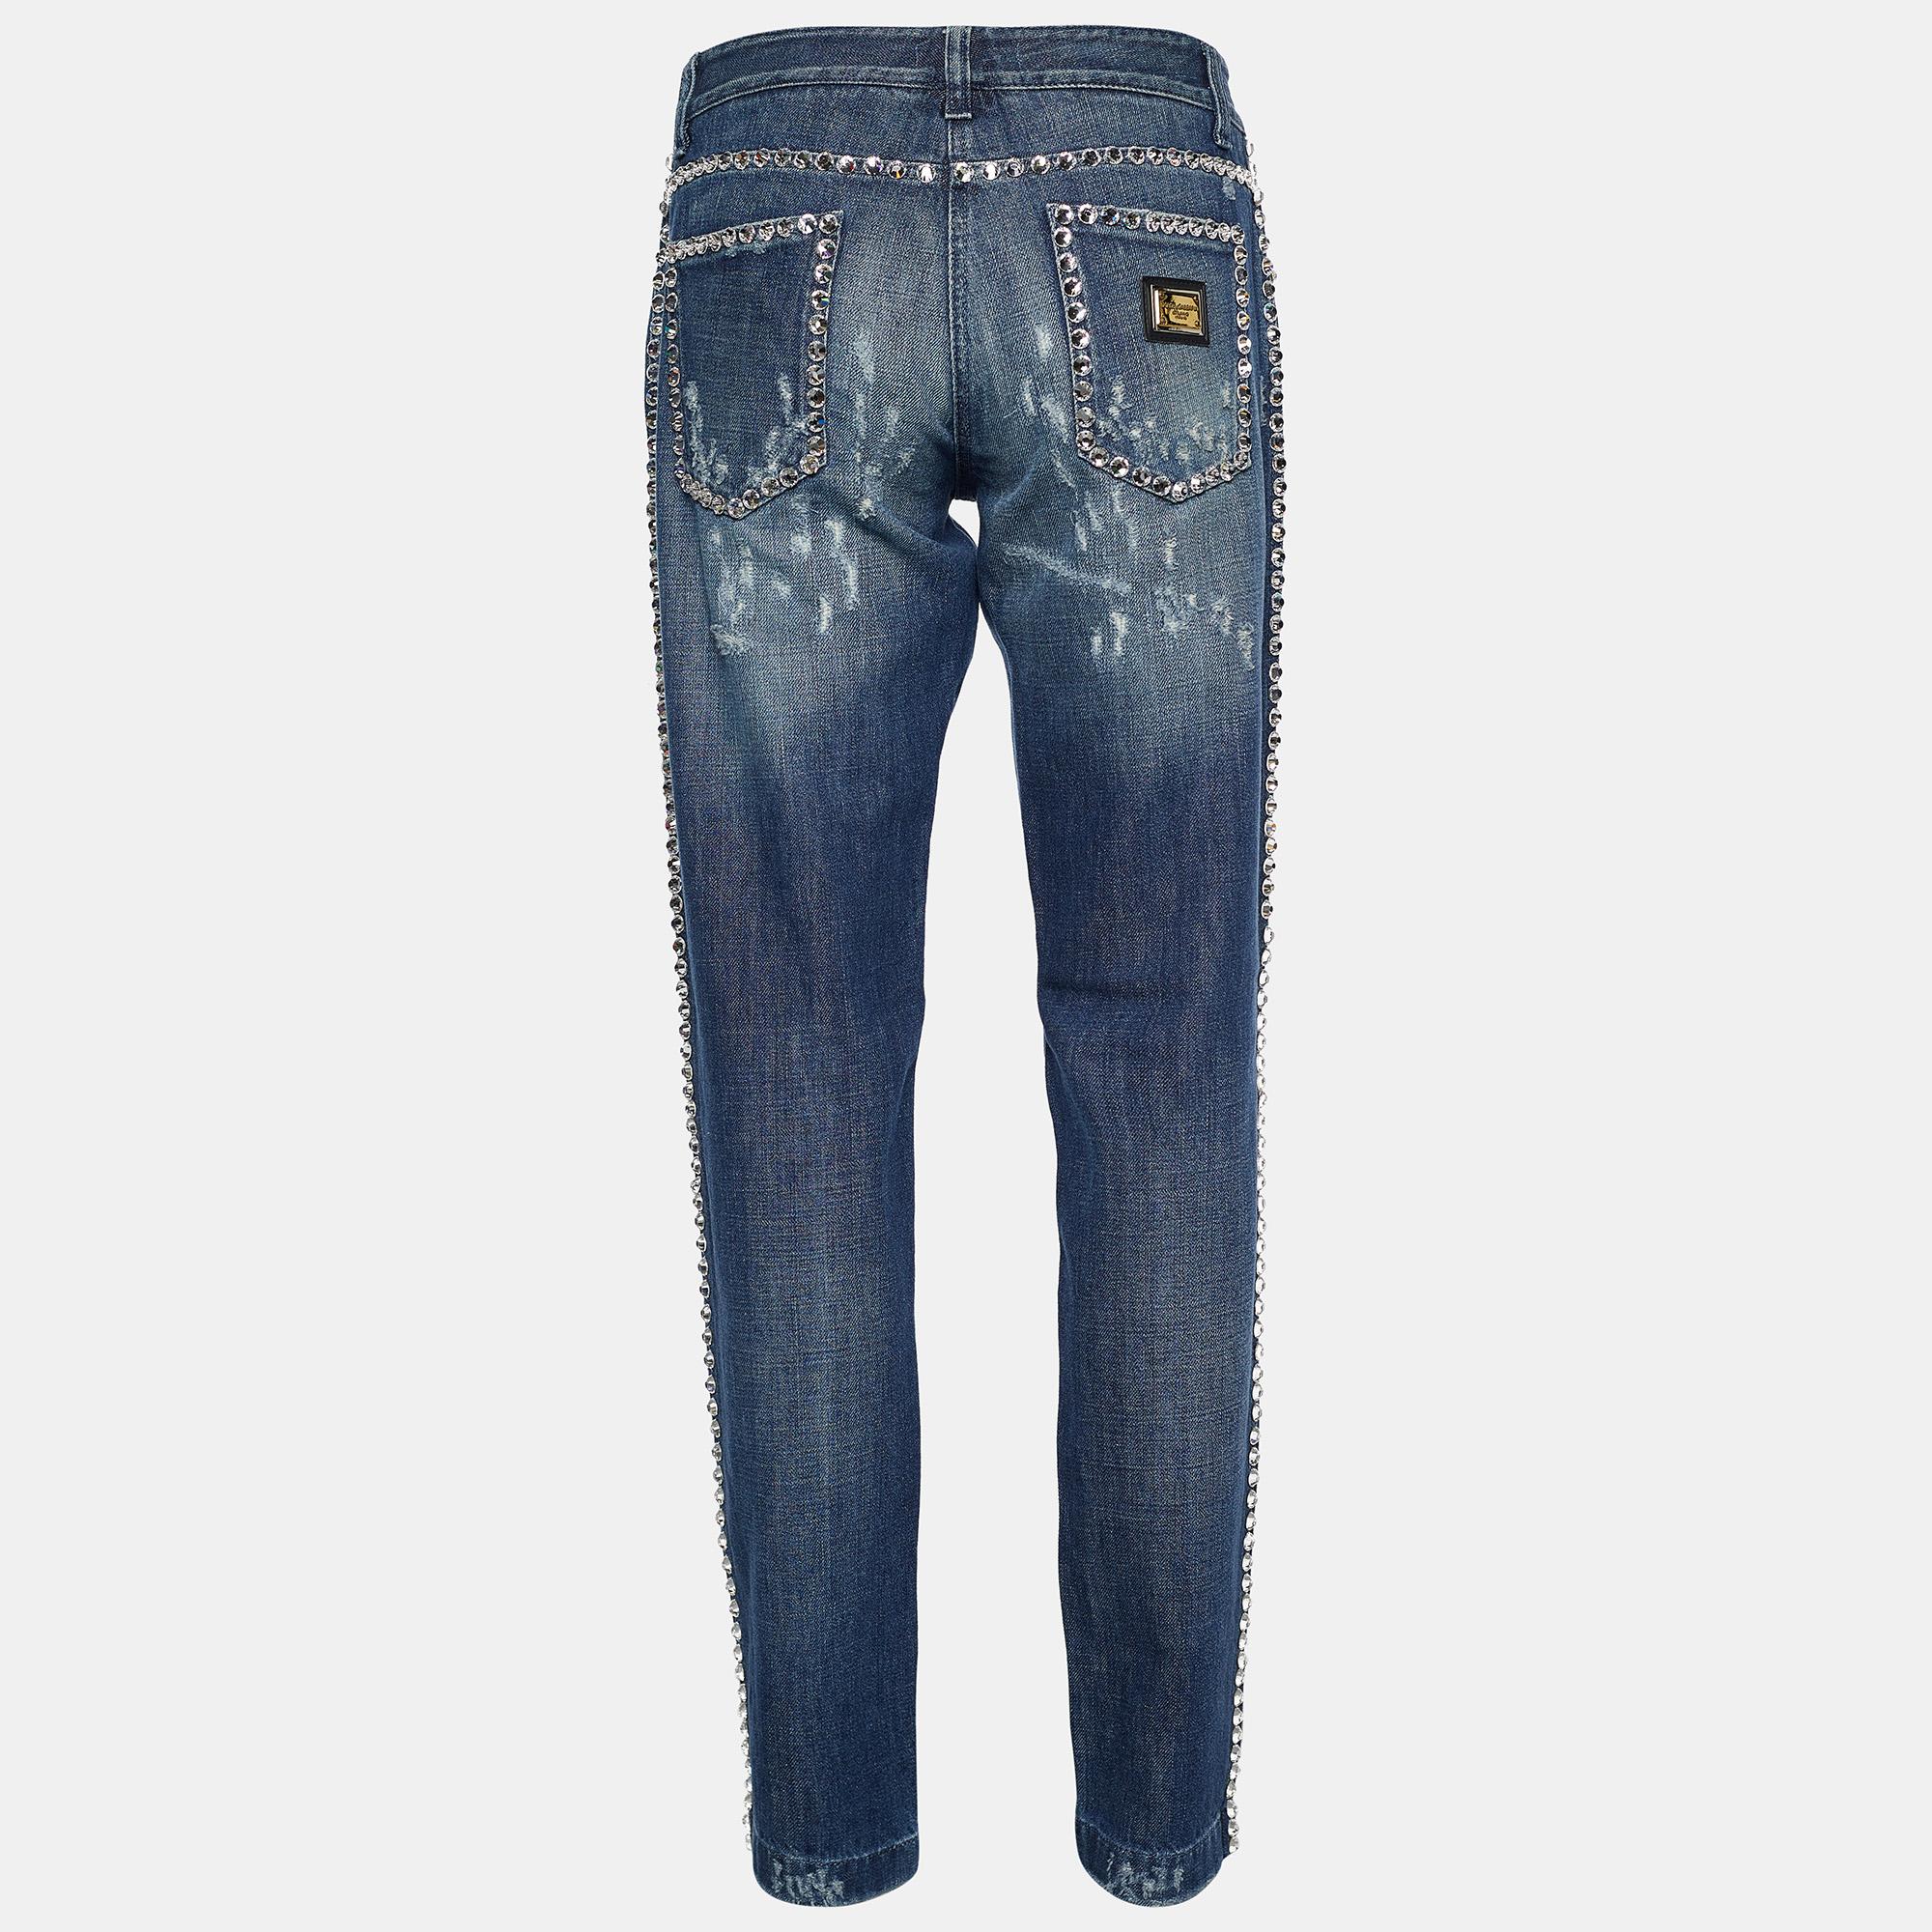 Comfy and classy jeans like these are a closet necessity! These jeans from Dolce & Gabbana are super stylish. They have been fashioned in indigo faded-effect denim fabric, which is elevated with distressed detailing and embellishments. These jeans